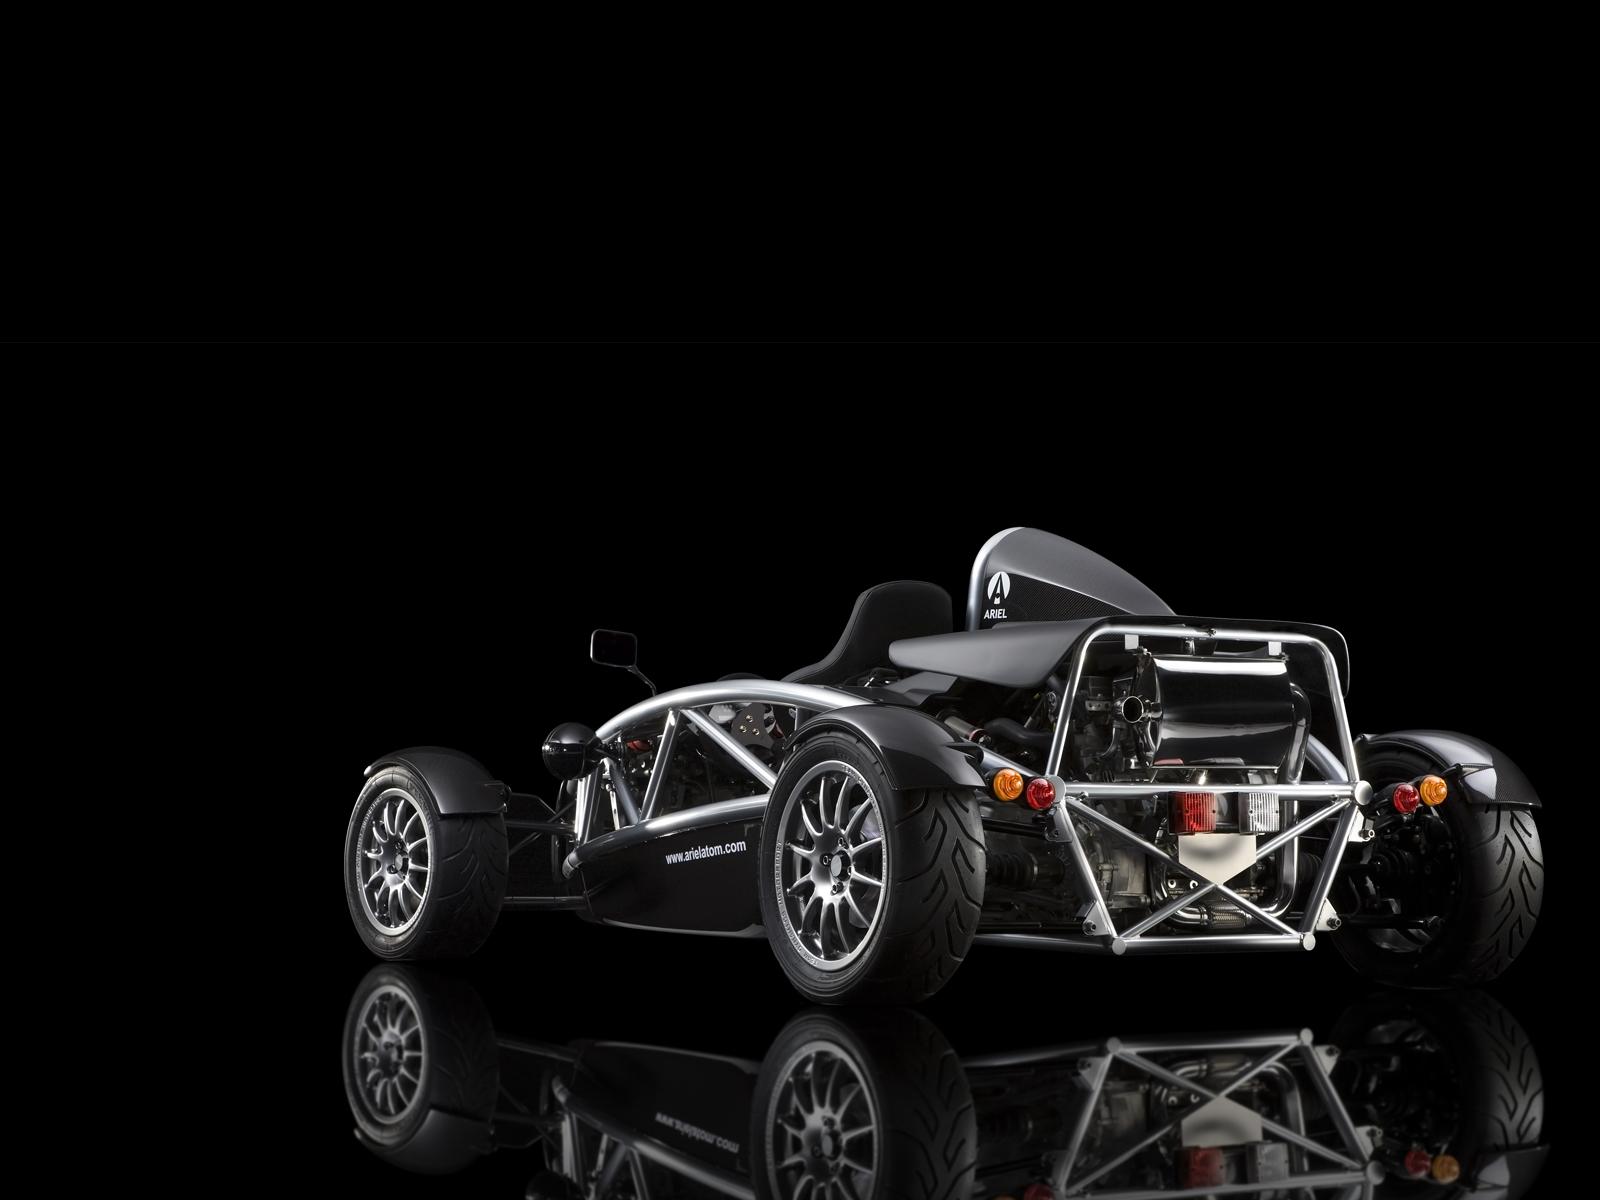 vehicles, ariel atom, black car, race car, reflection cell phone wallpapers